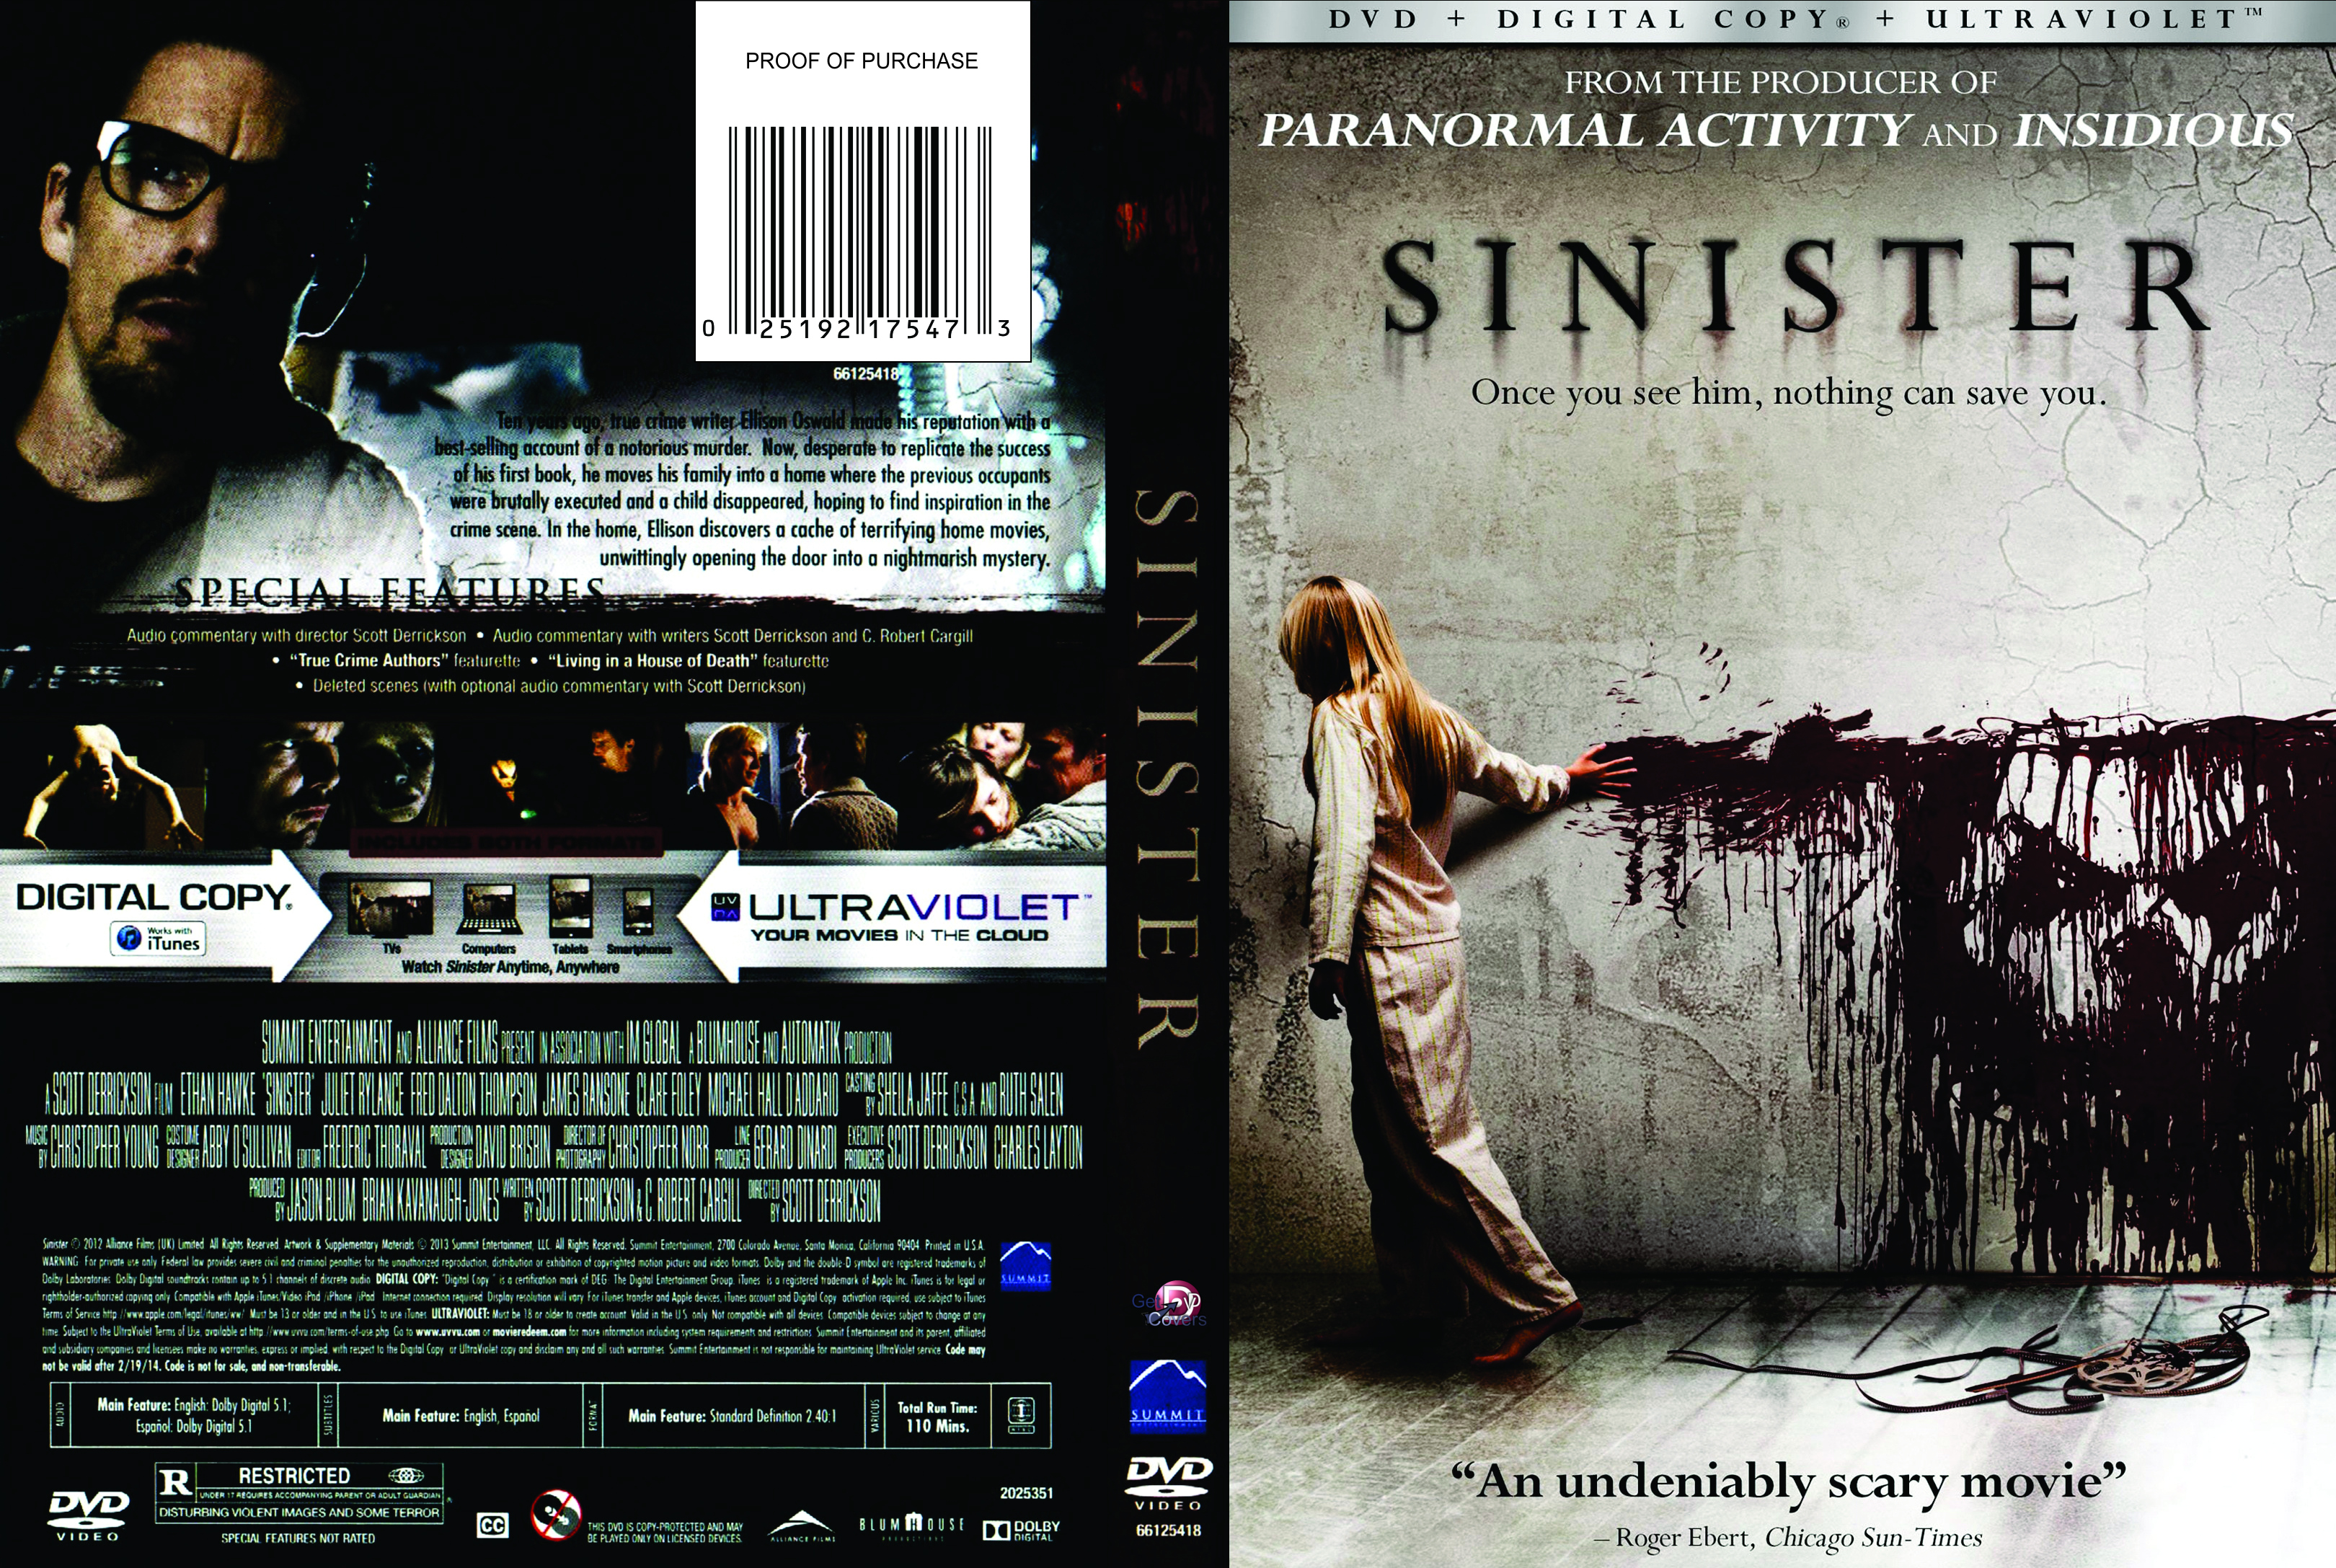 Jaquette DVD Sinister Zone 1